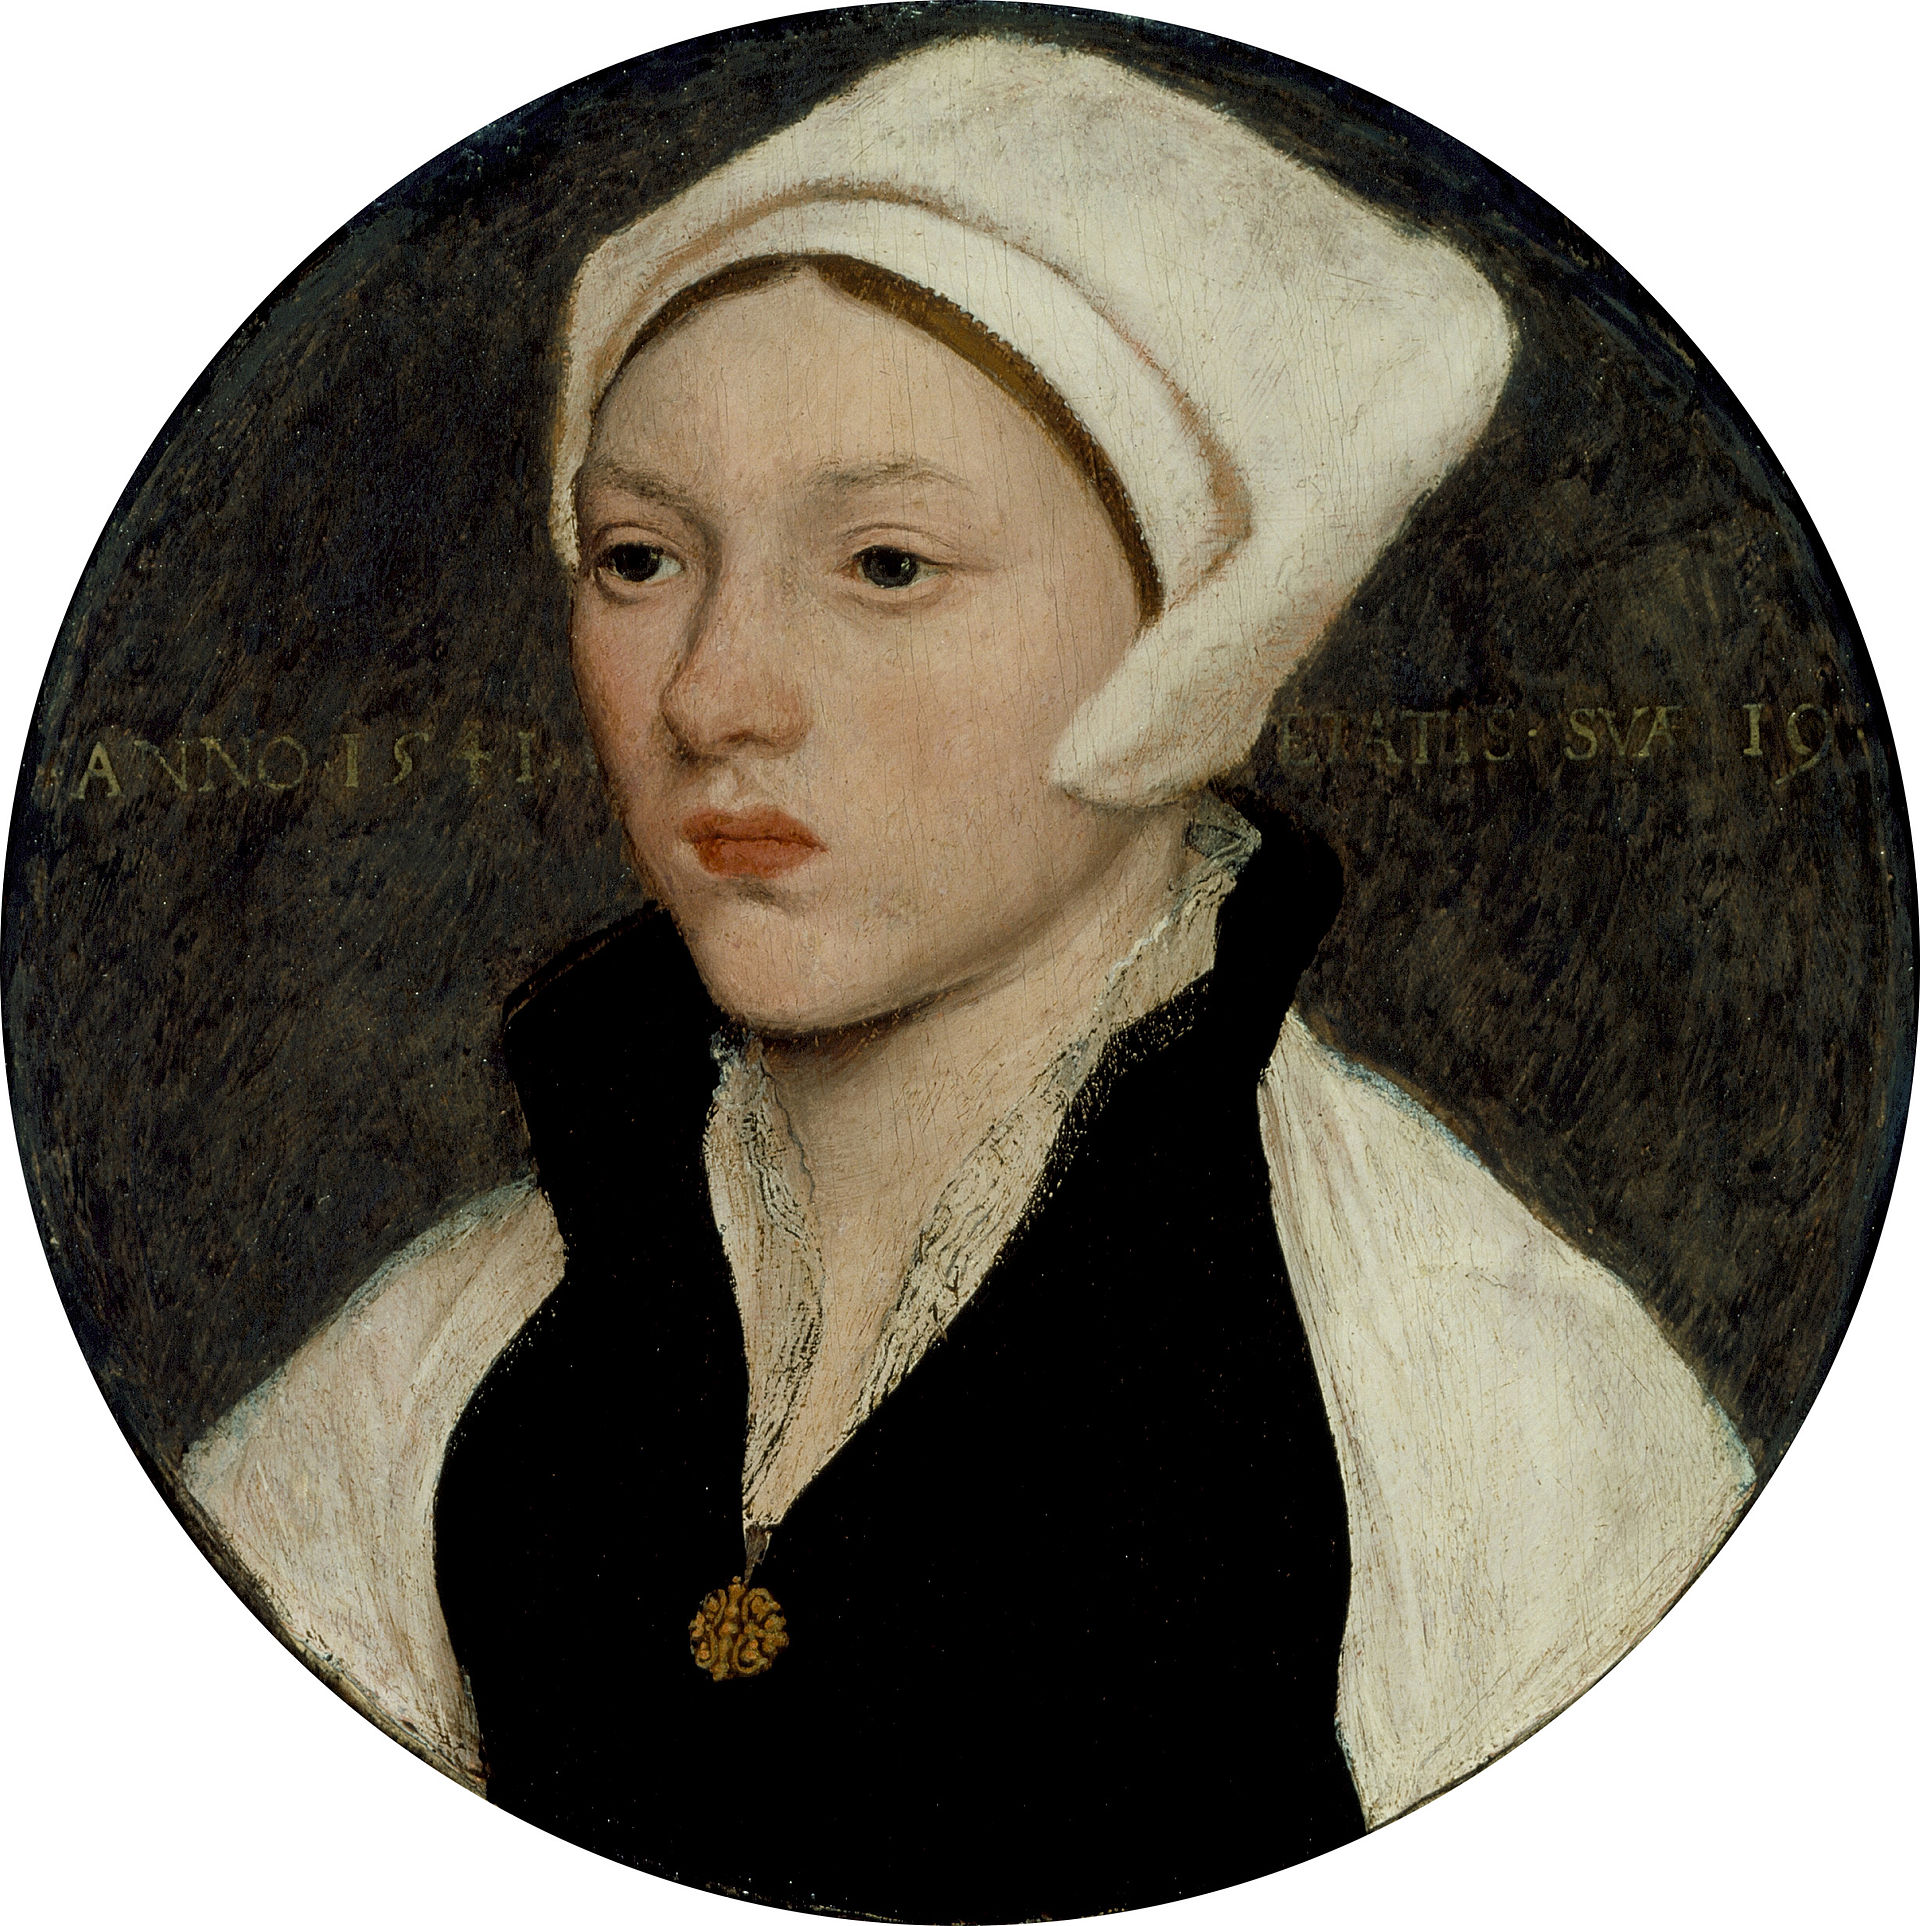 Young Woman with a White Coif by Hans Holbein the Younger, 1541 